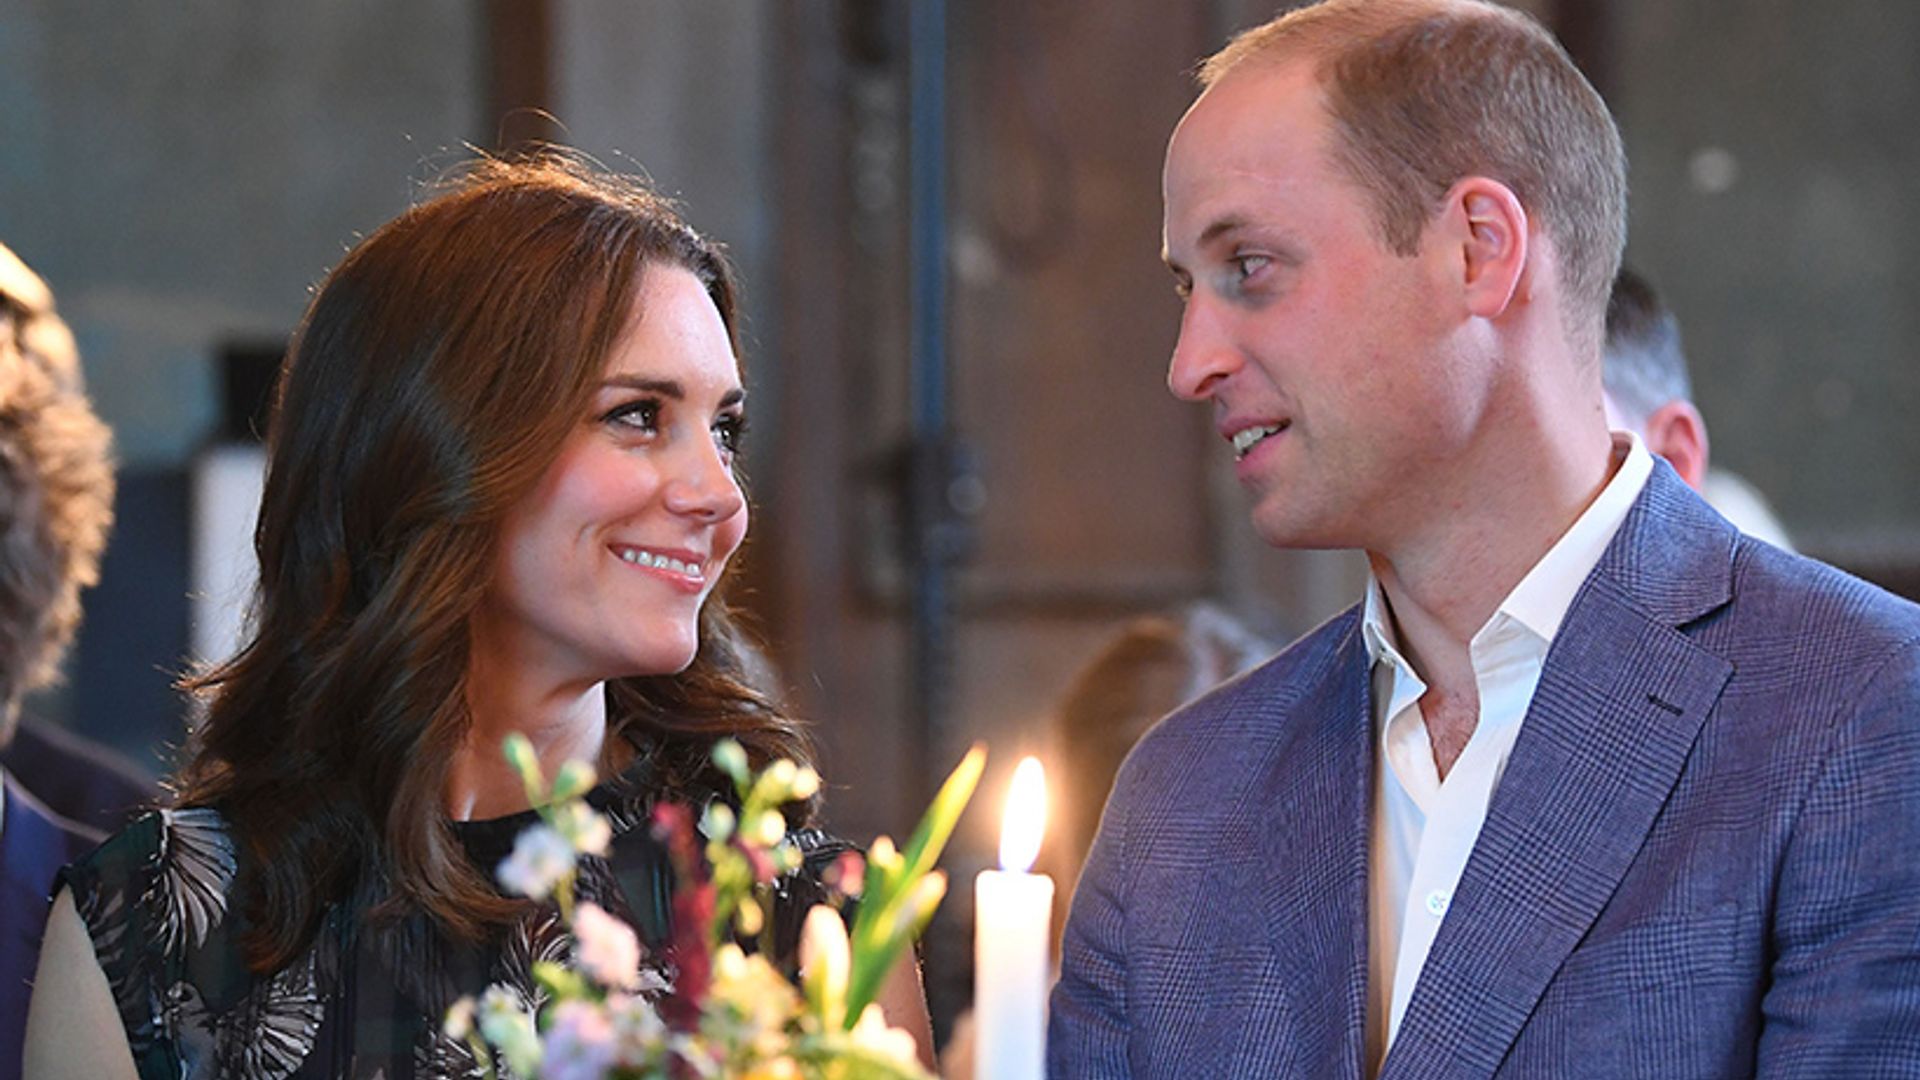 Prince William and Duchess Kate Release Their First Official Portrait of One Another.